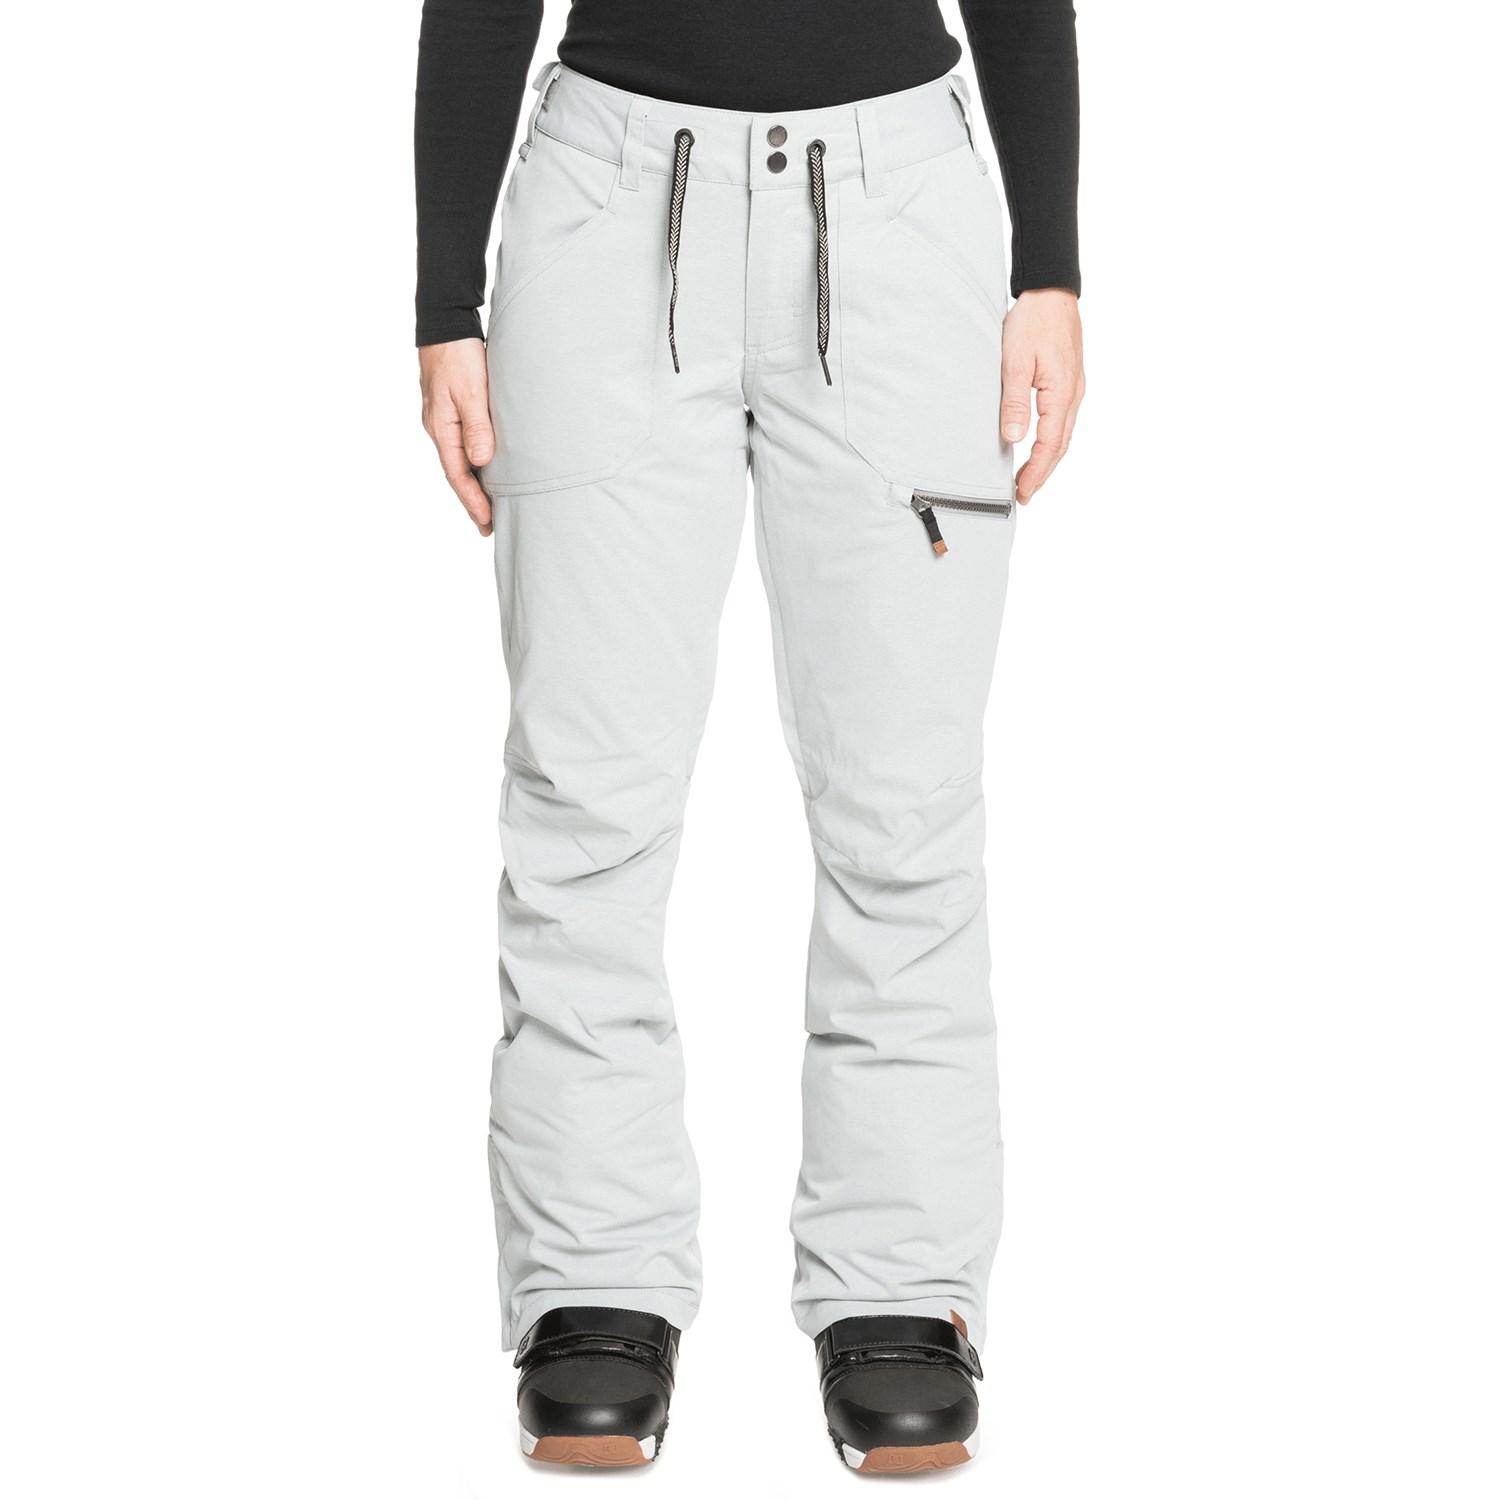 Roxy Down The Line Insulated Snowboard Pant (Women's)